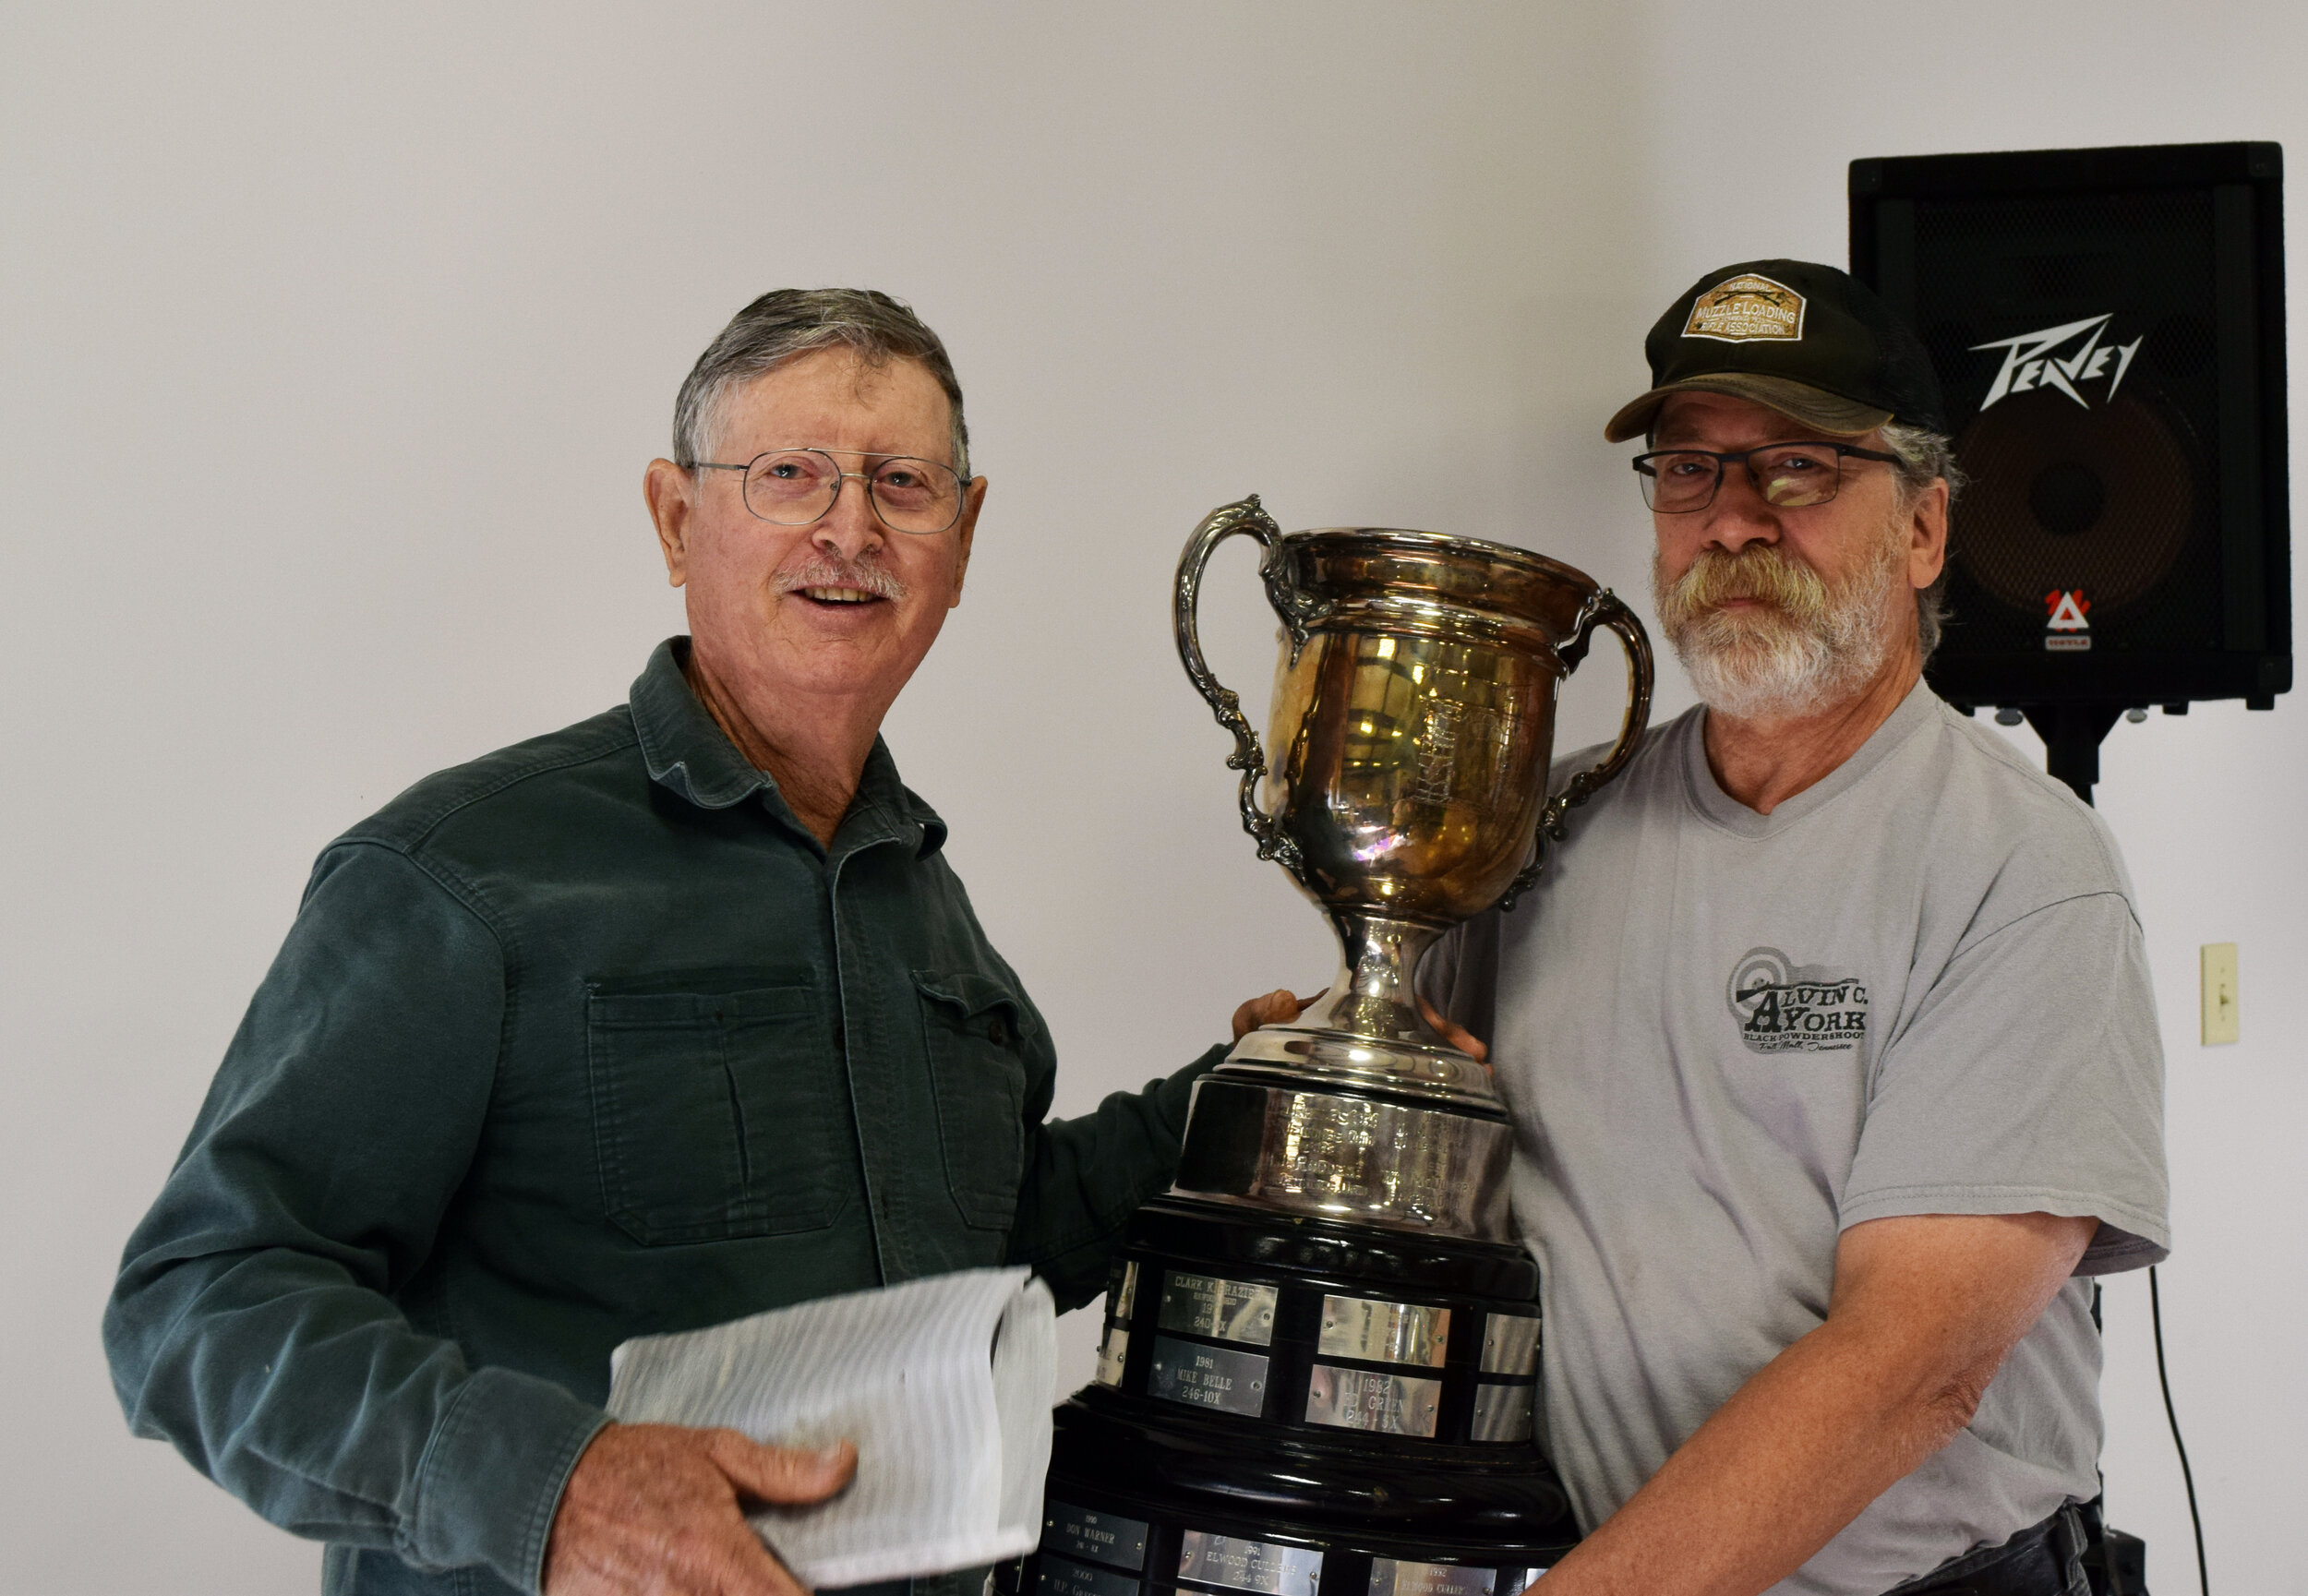  J.L. Hargis - Aggregate A - Unlimited Rifle Championship Winner with Rifle Committee Member Mark Donaldson 